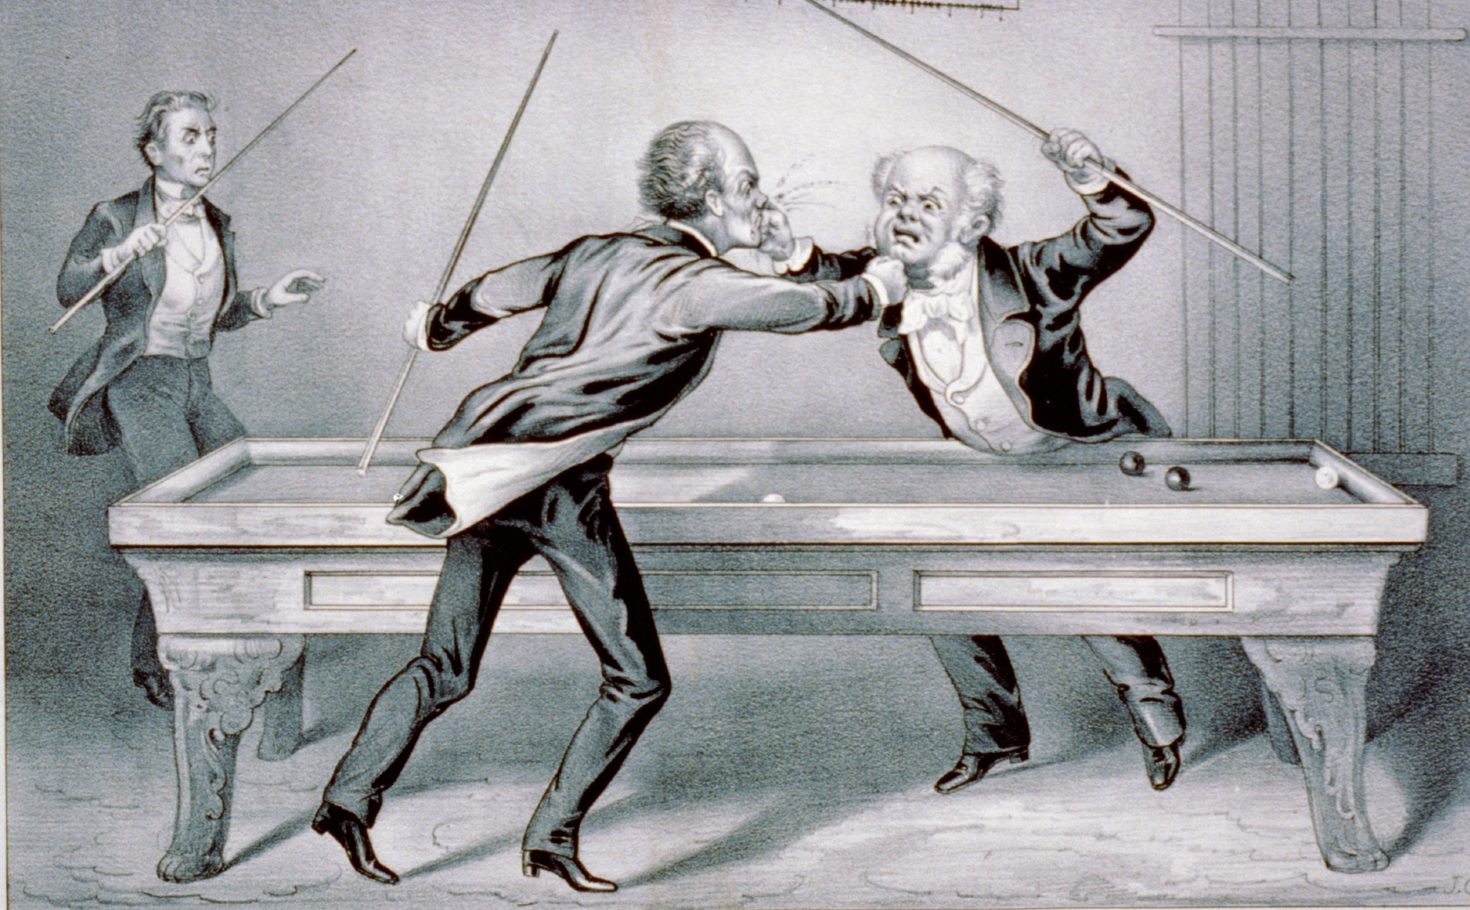 Two men fighting over a pool table.a